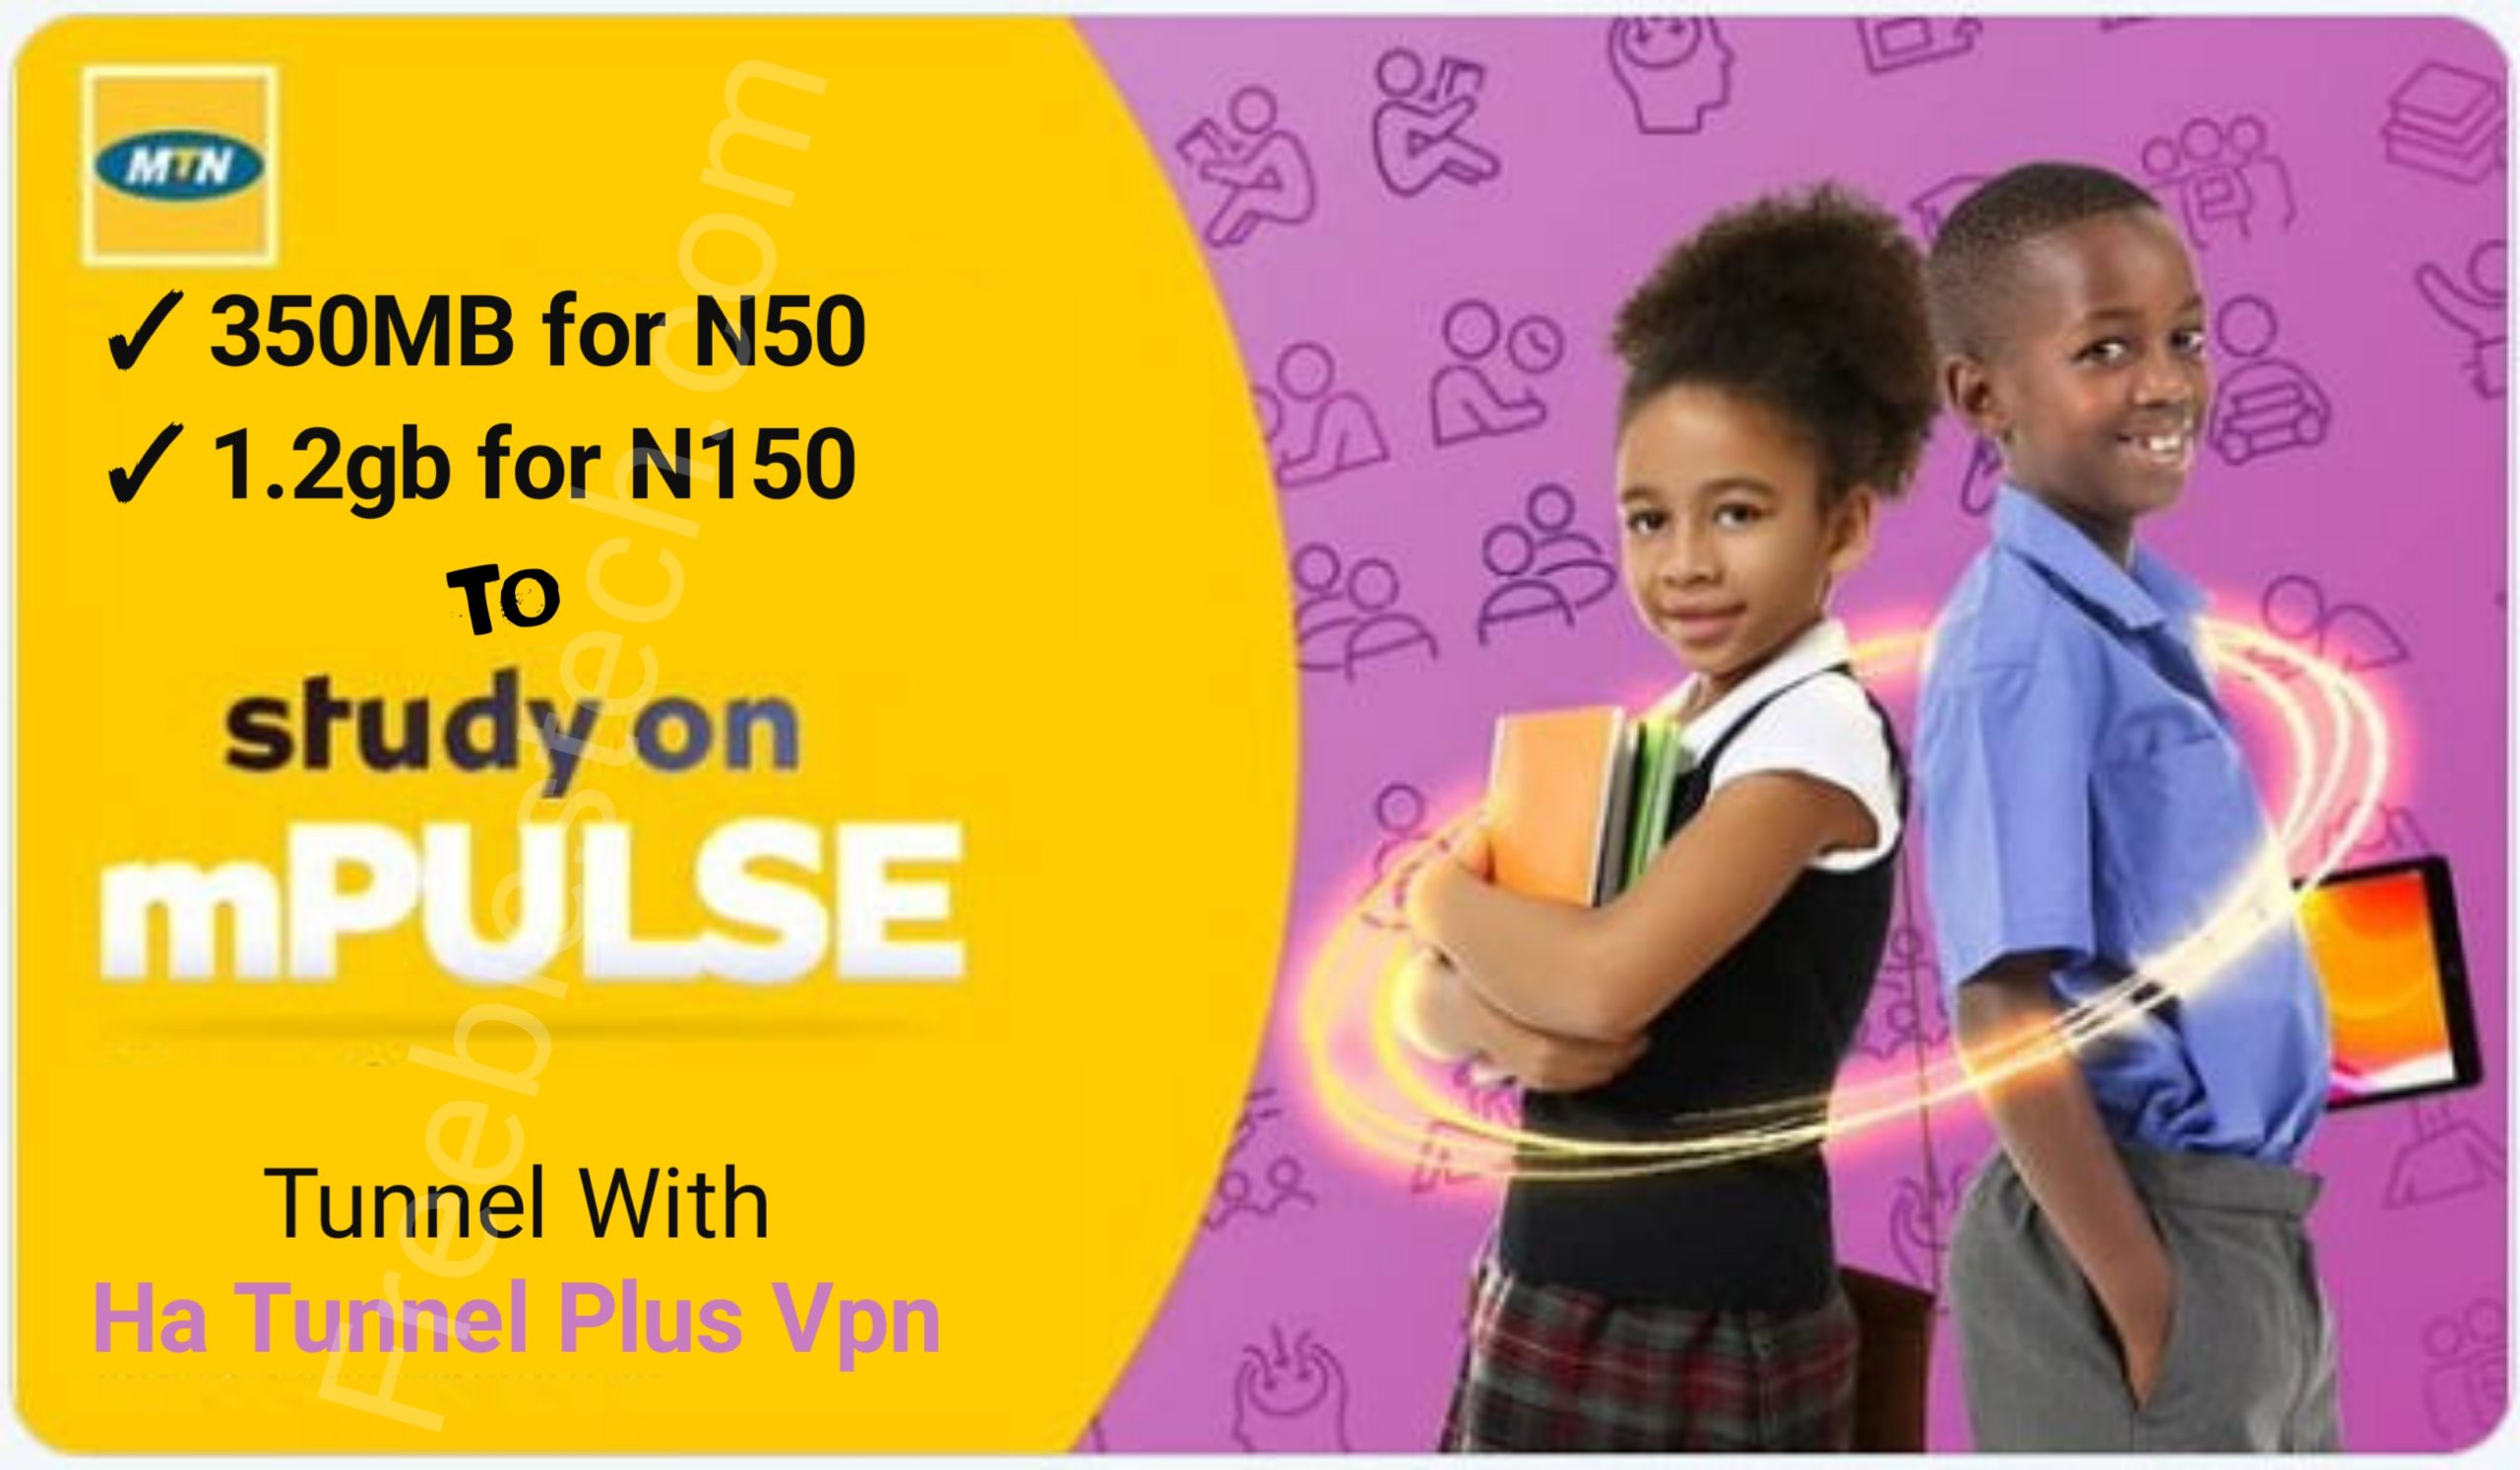 How To Activate MTN Mpulse Special Data Plan Tunneled With Vpn